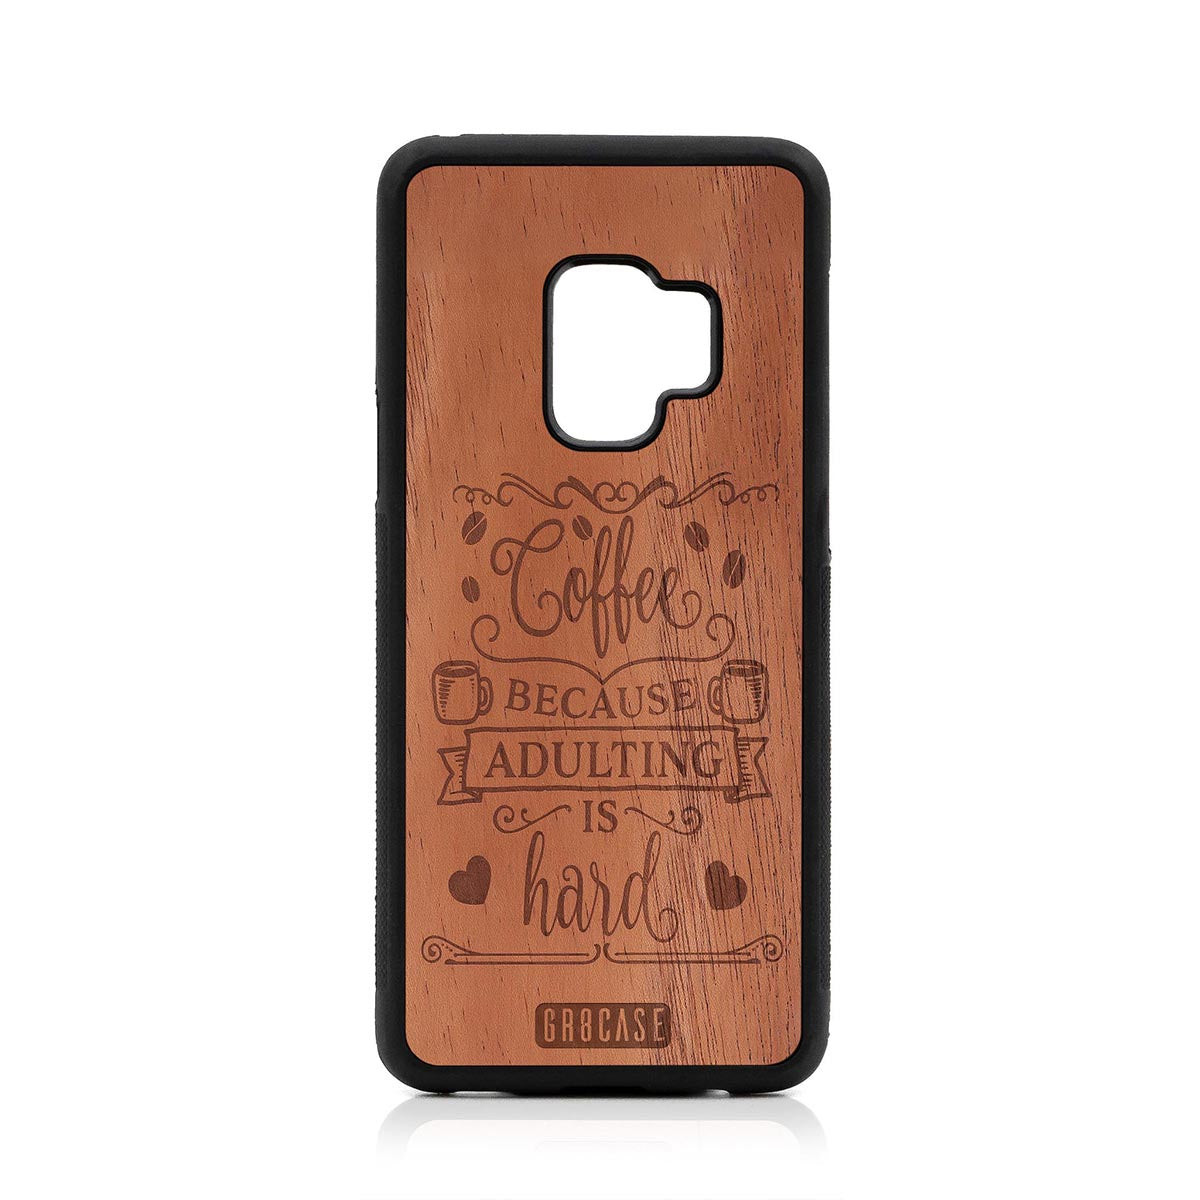 Coffee Because Adulting Is Hard Design Wood Case For Samsung Galaxy S9 by GR8CASE